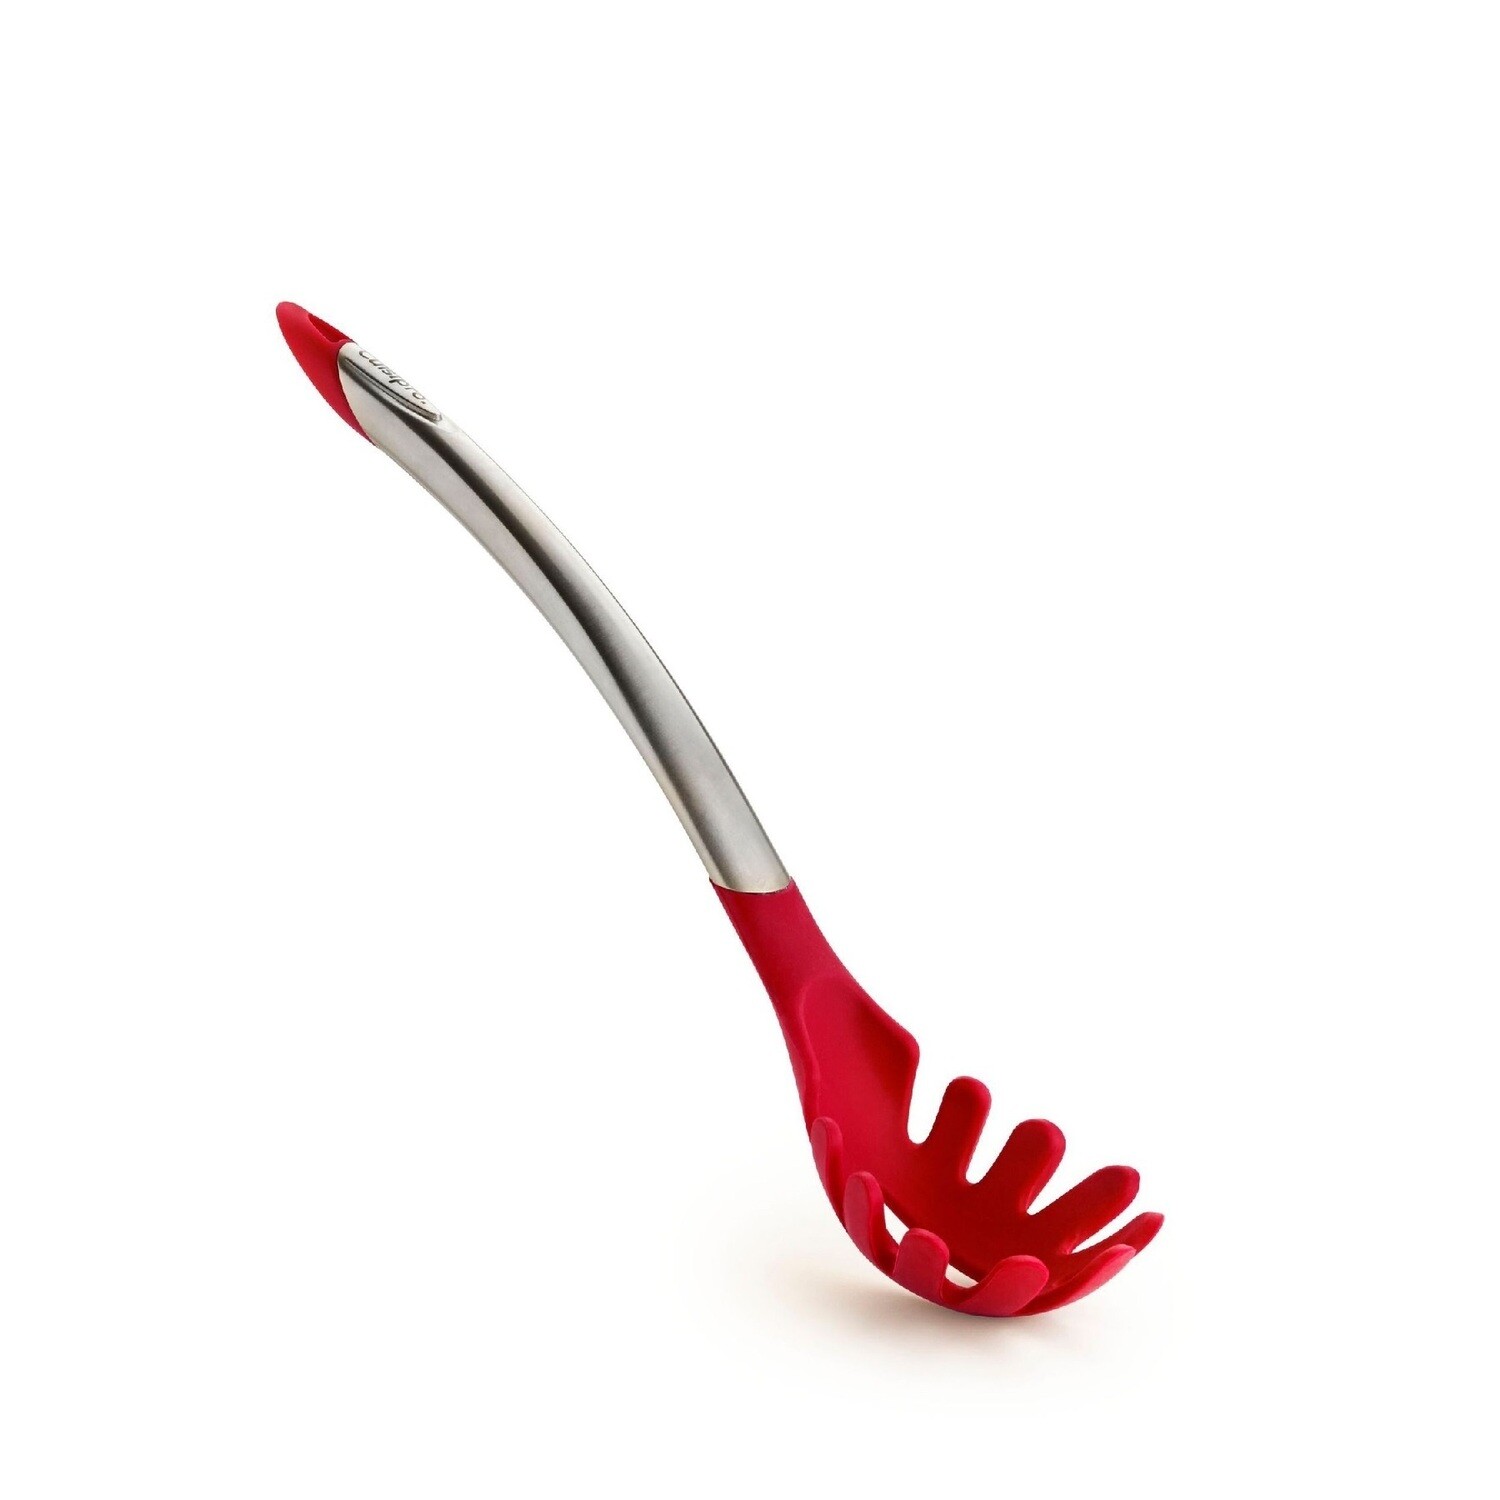 CUISIPRO 'silicone tools' pastalepel 35cm rvs/silicone rood  PROMO 19,50 -20%